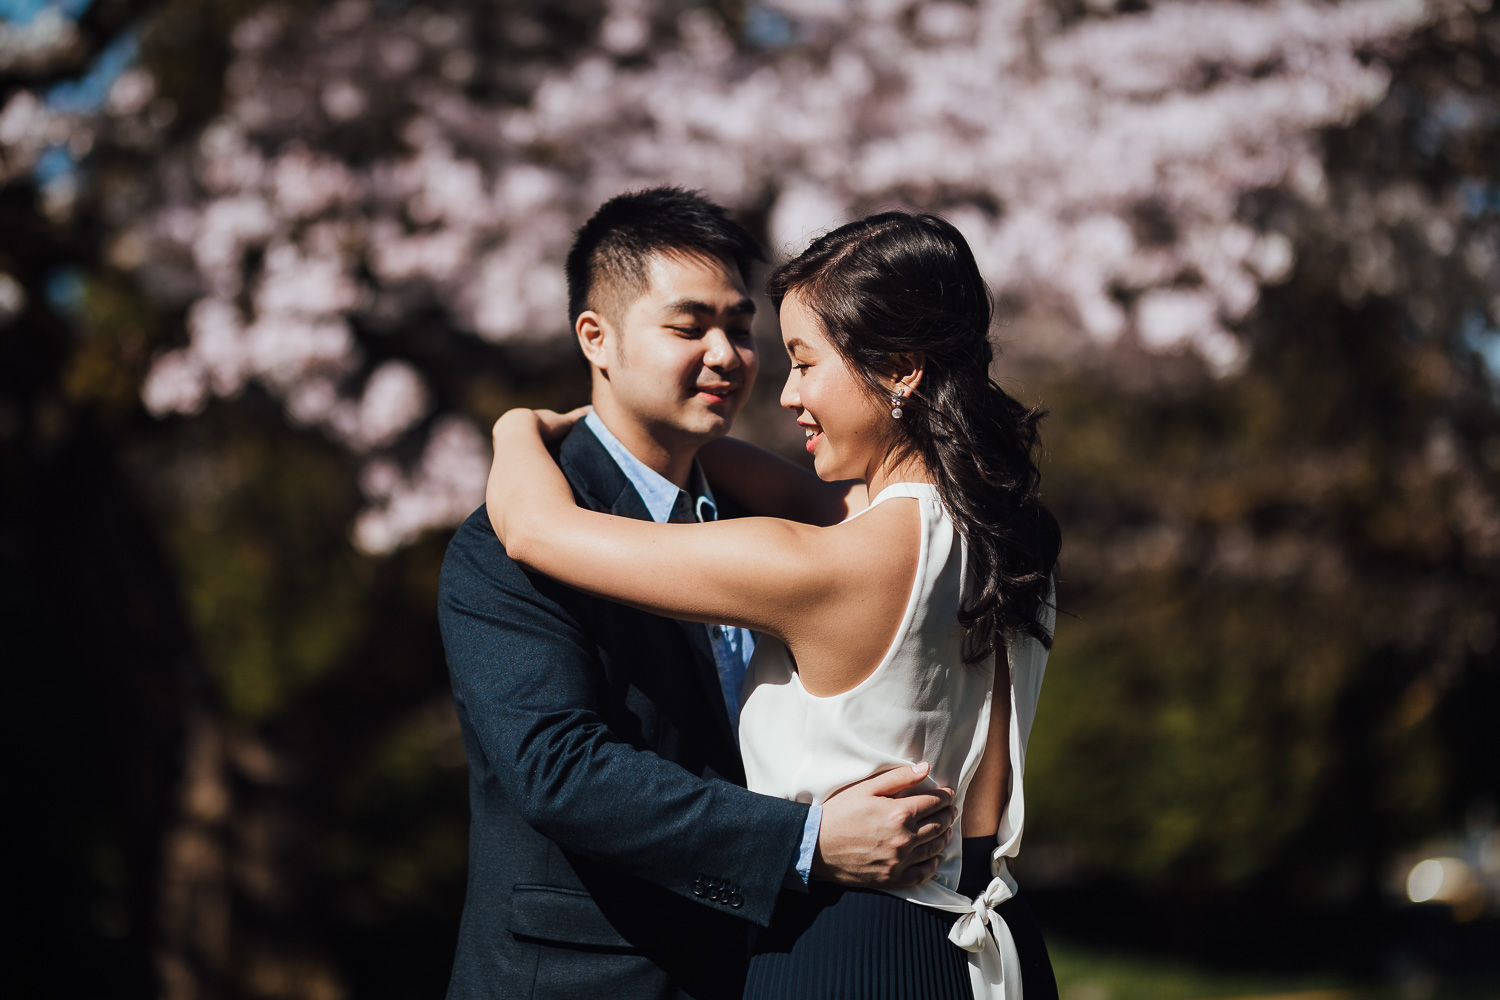 vancouver engagement photography during cherry blossom season at UBC